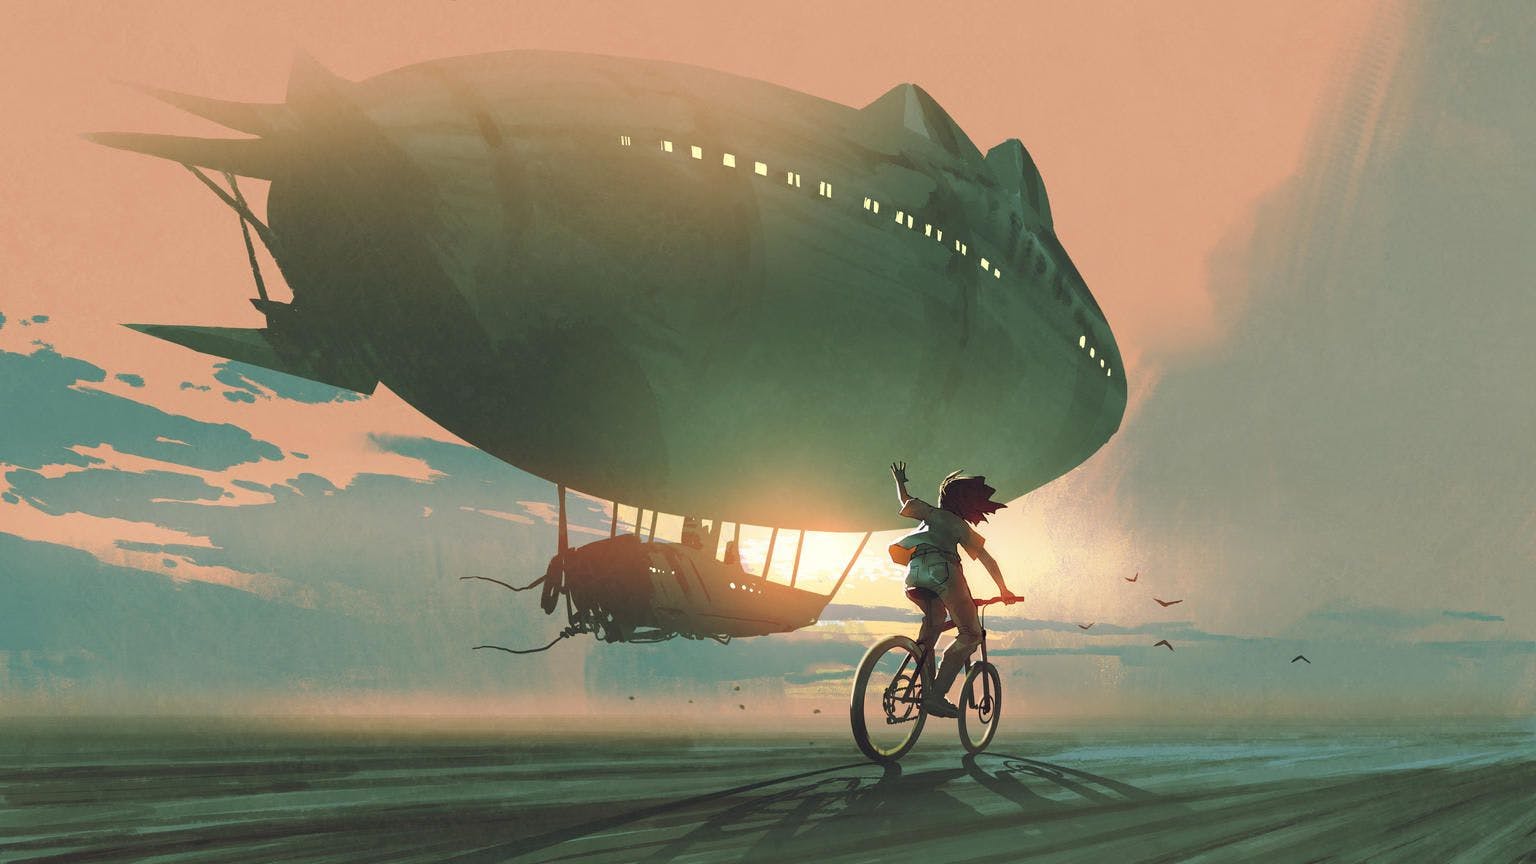 Blimp and a bicycle